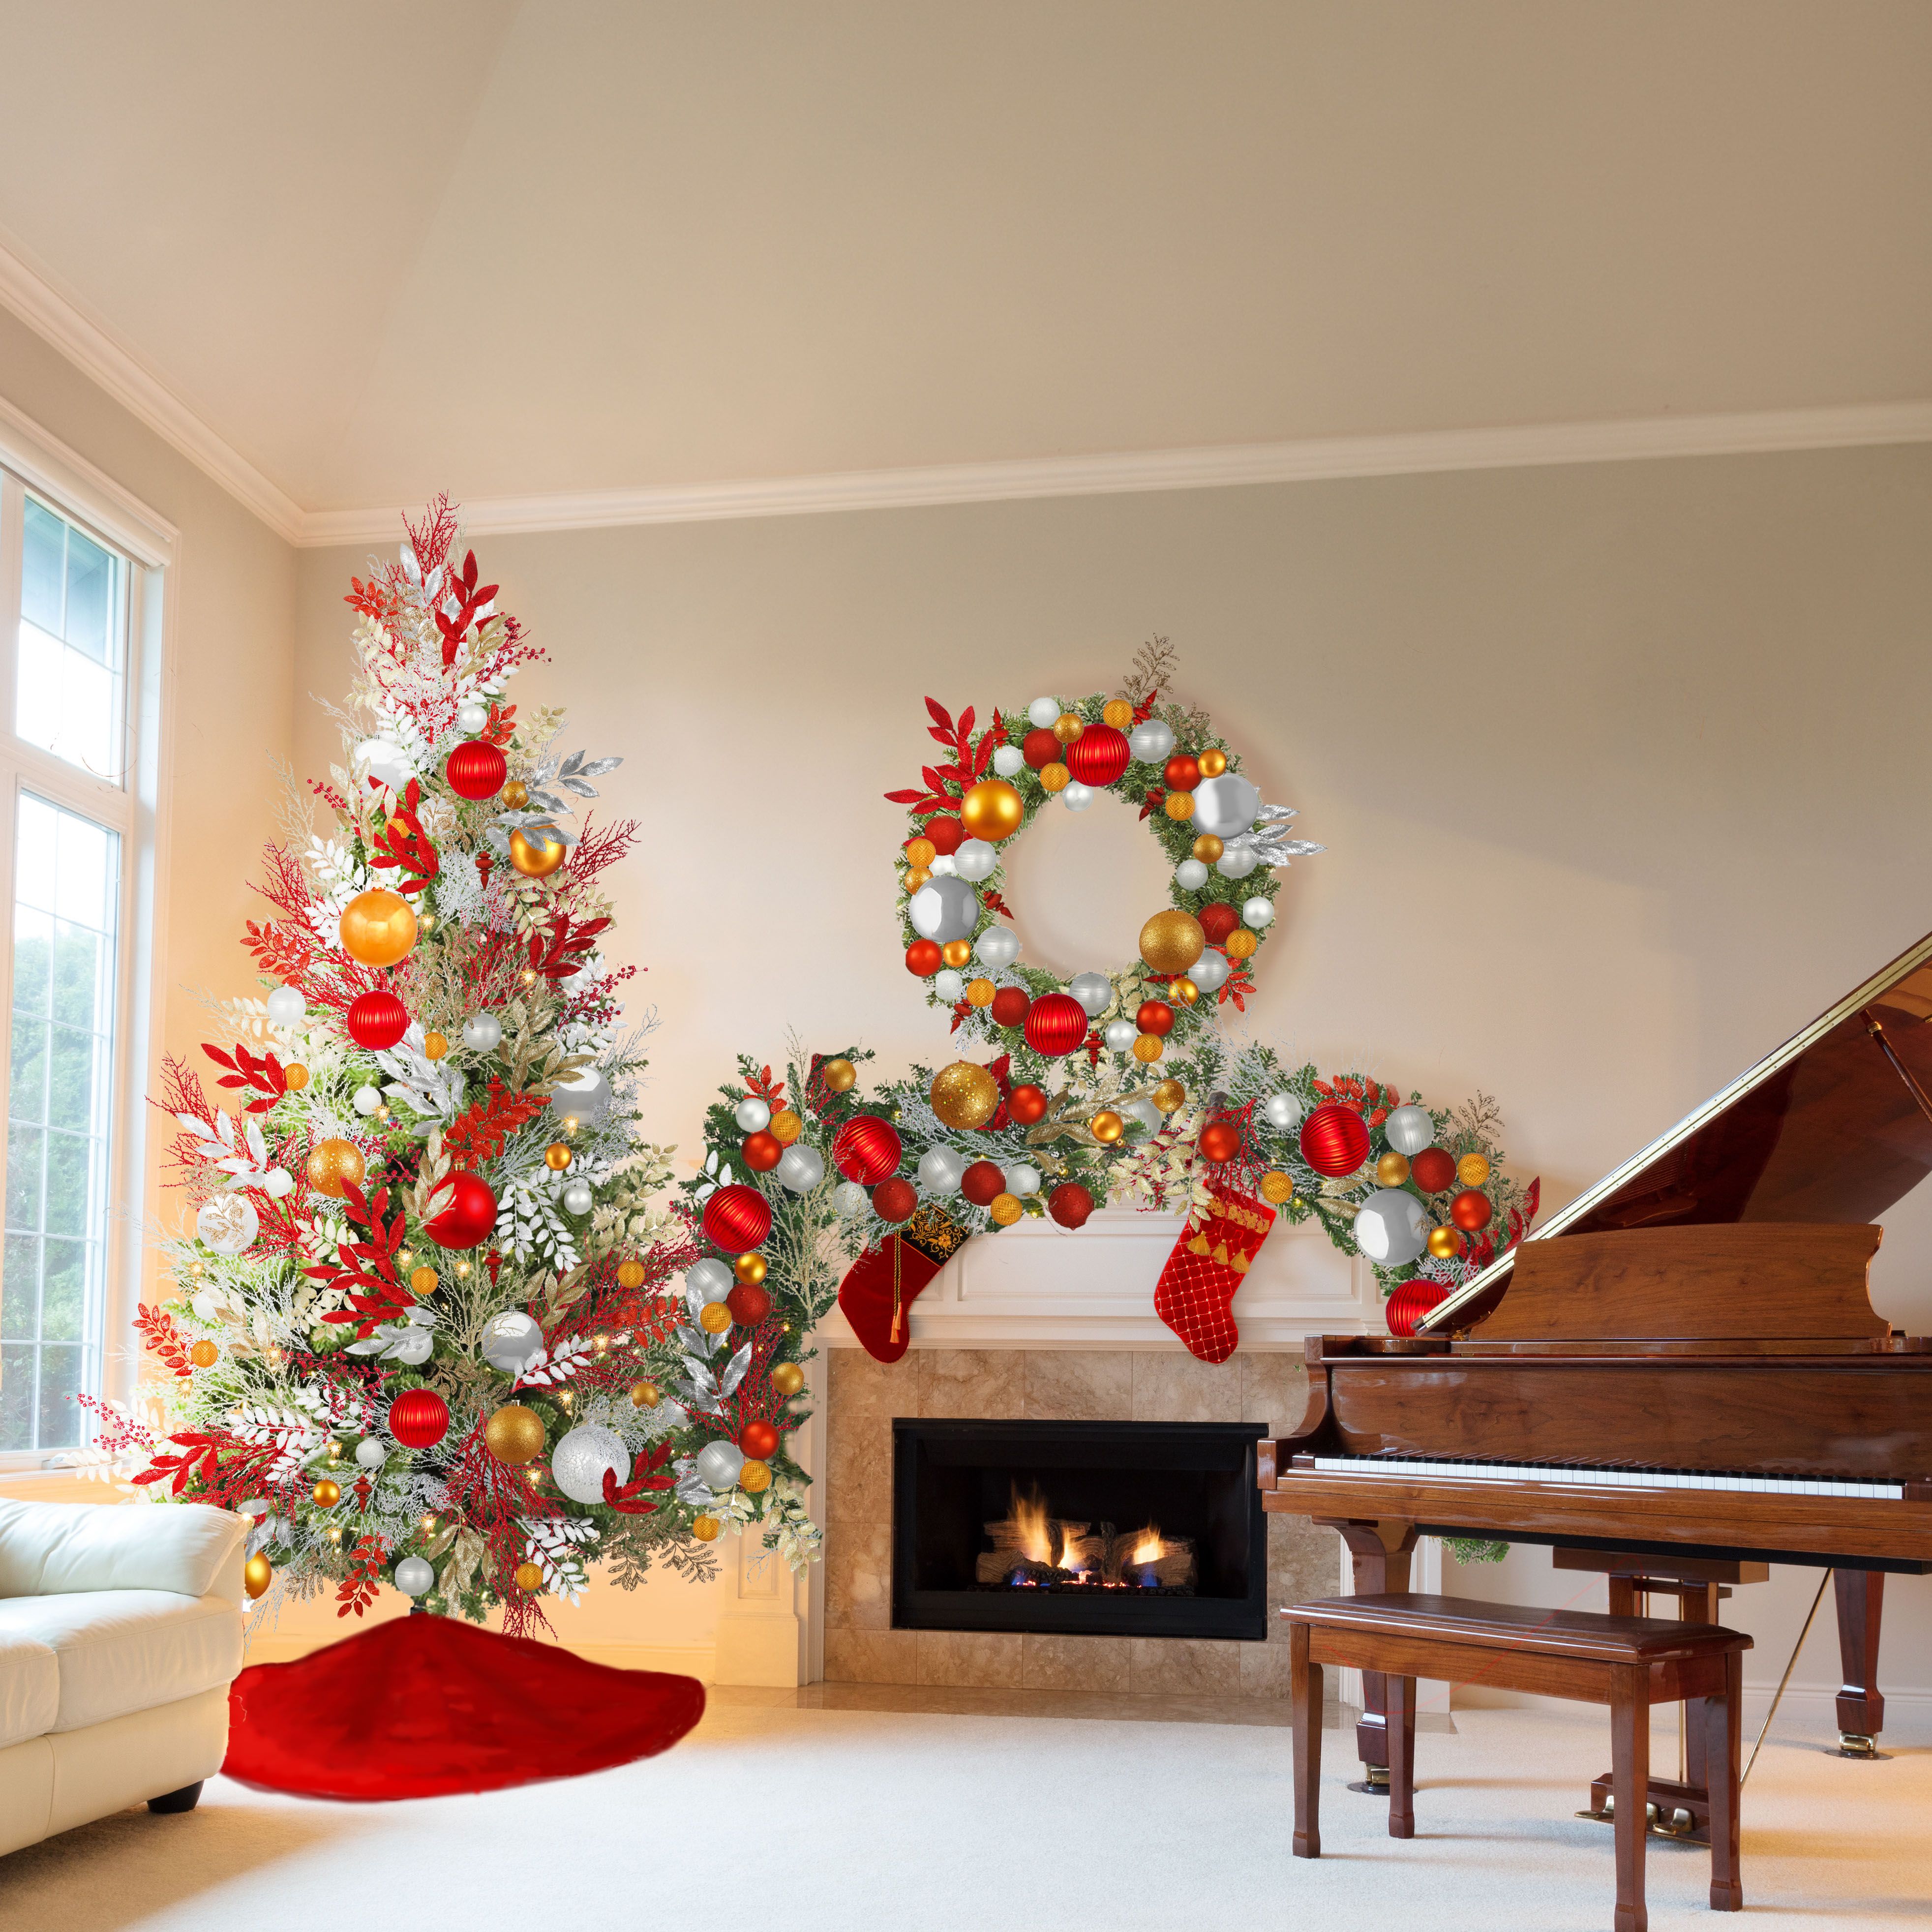 Festive Favorites pre-decorated Christmas greenery in living room